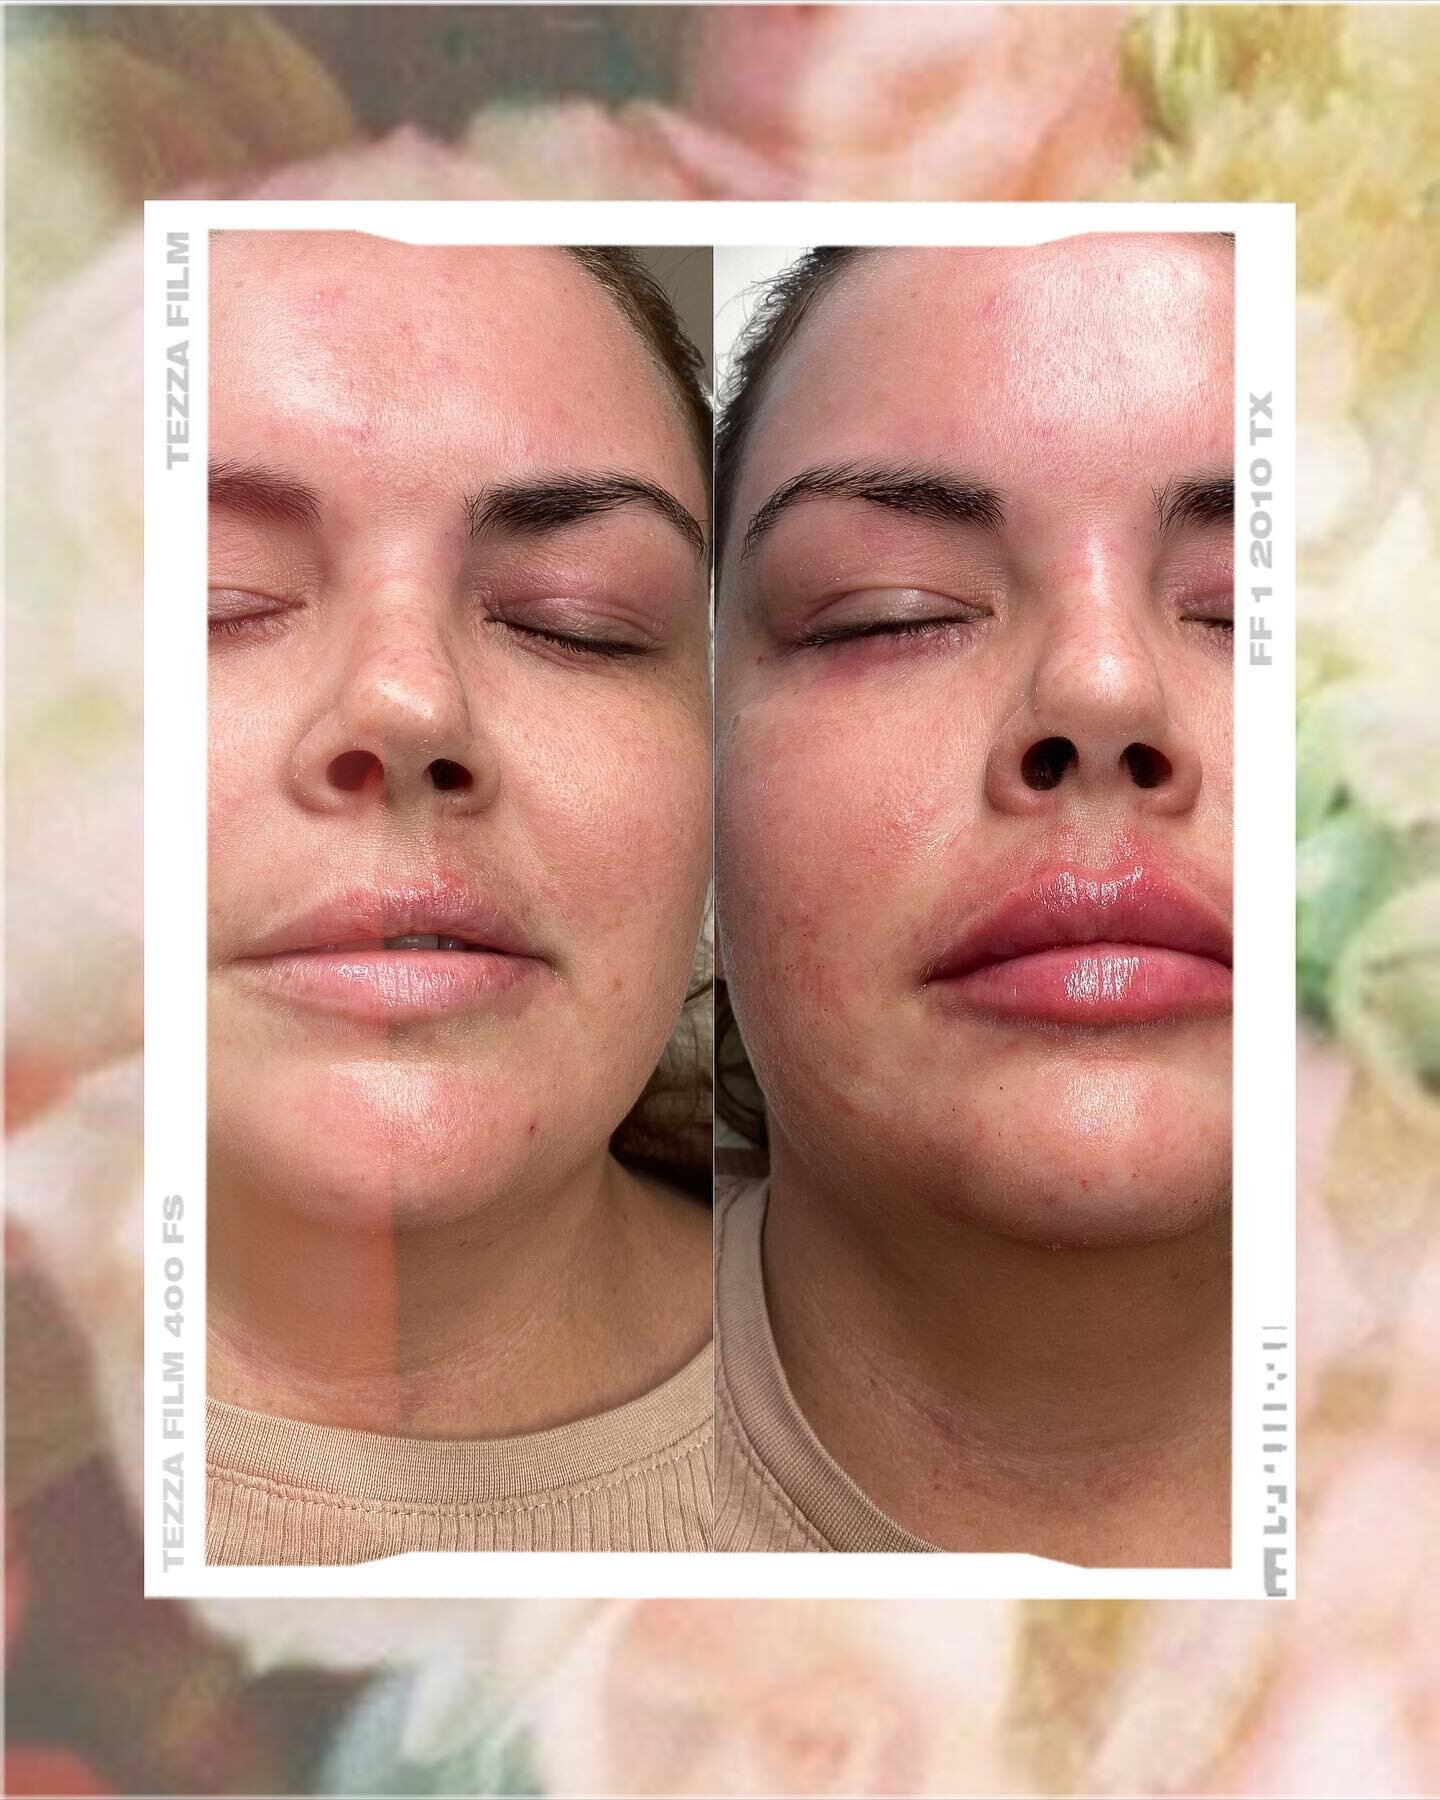 Facial balancing with lip filler on a first time, lip filler client 🤍 I aimed to create definition and a symmetrical shape for this lovely clients lips 🤍